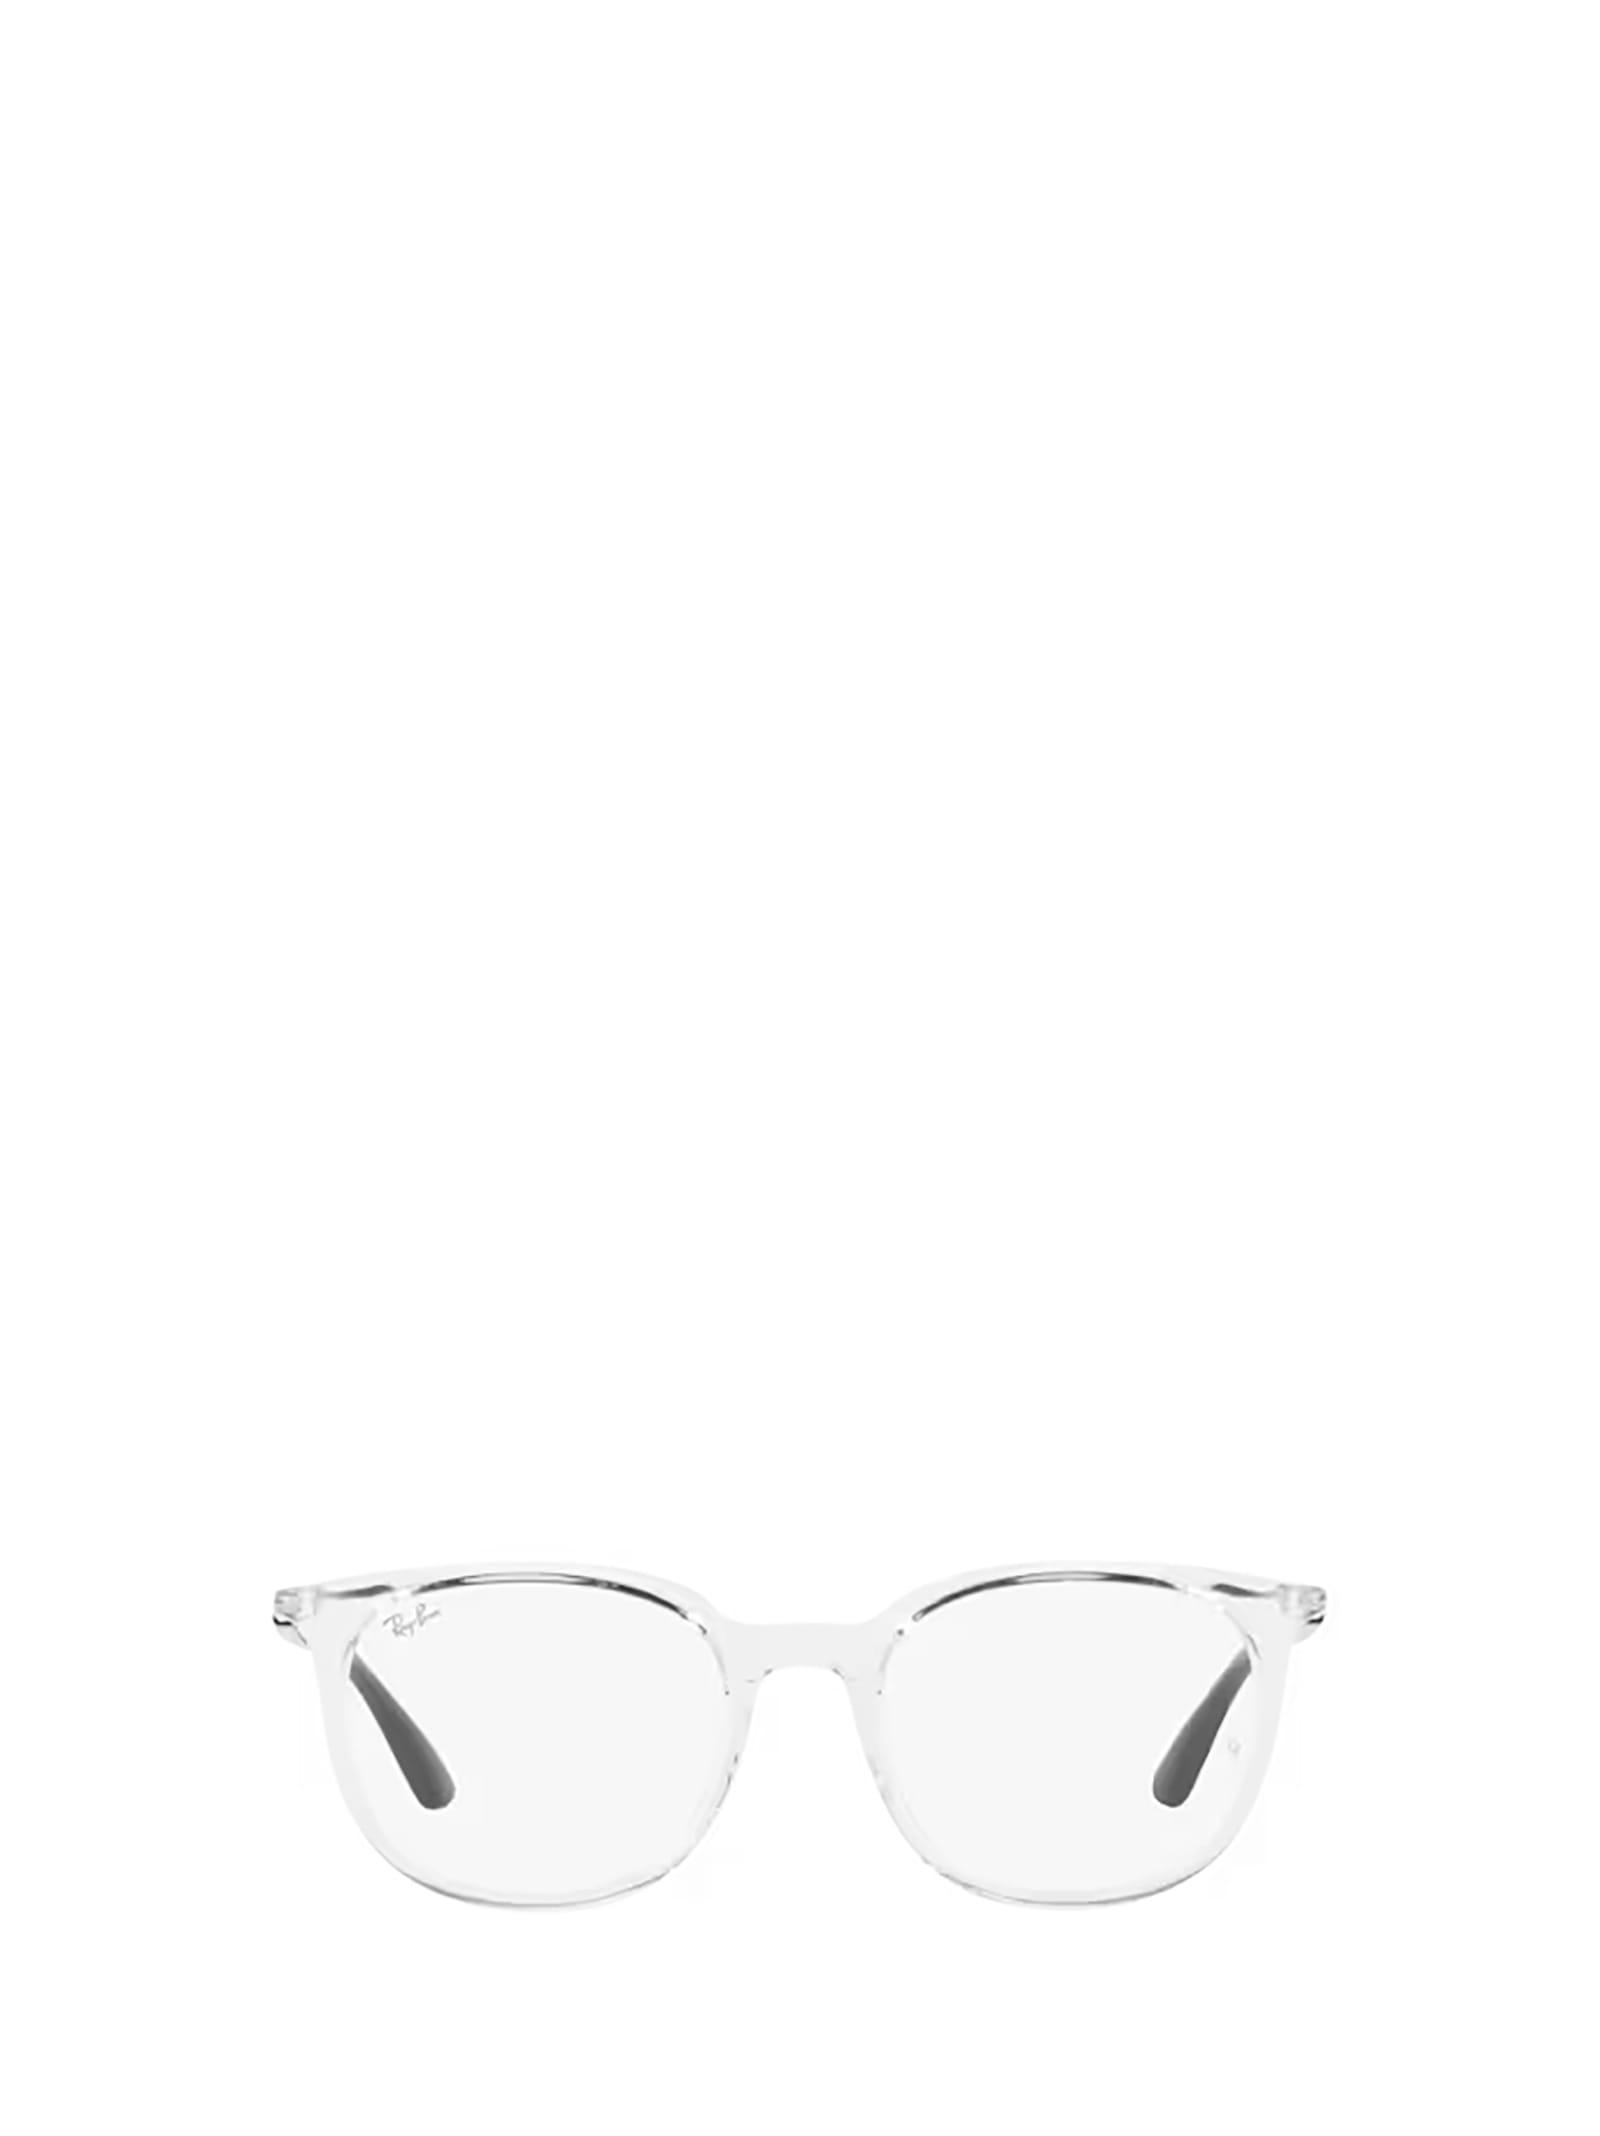 Ray-Ban Rx7190 Transparent Glasses in White | Lyst